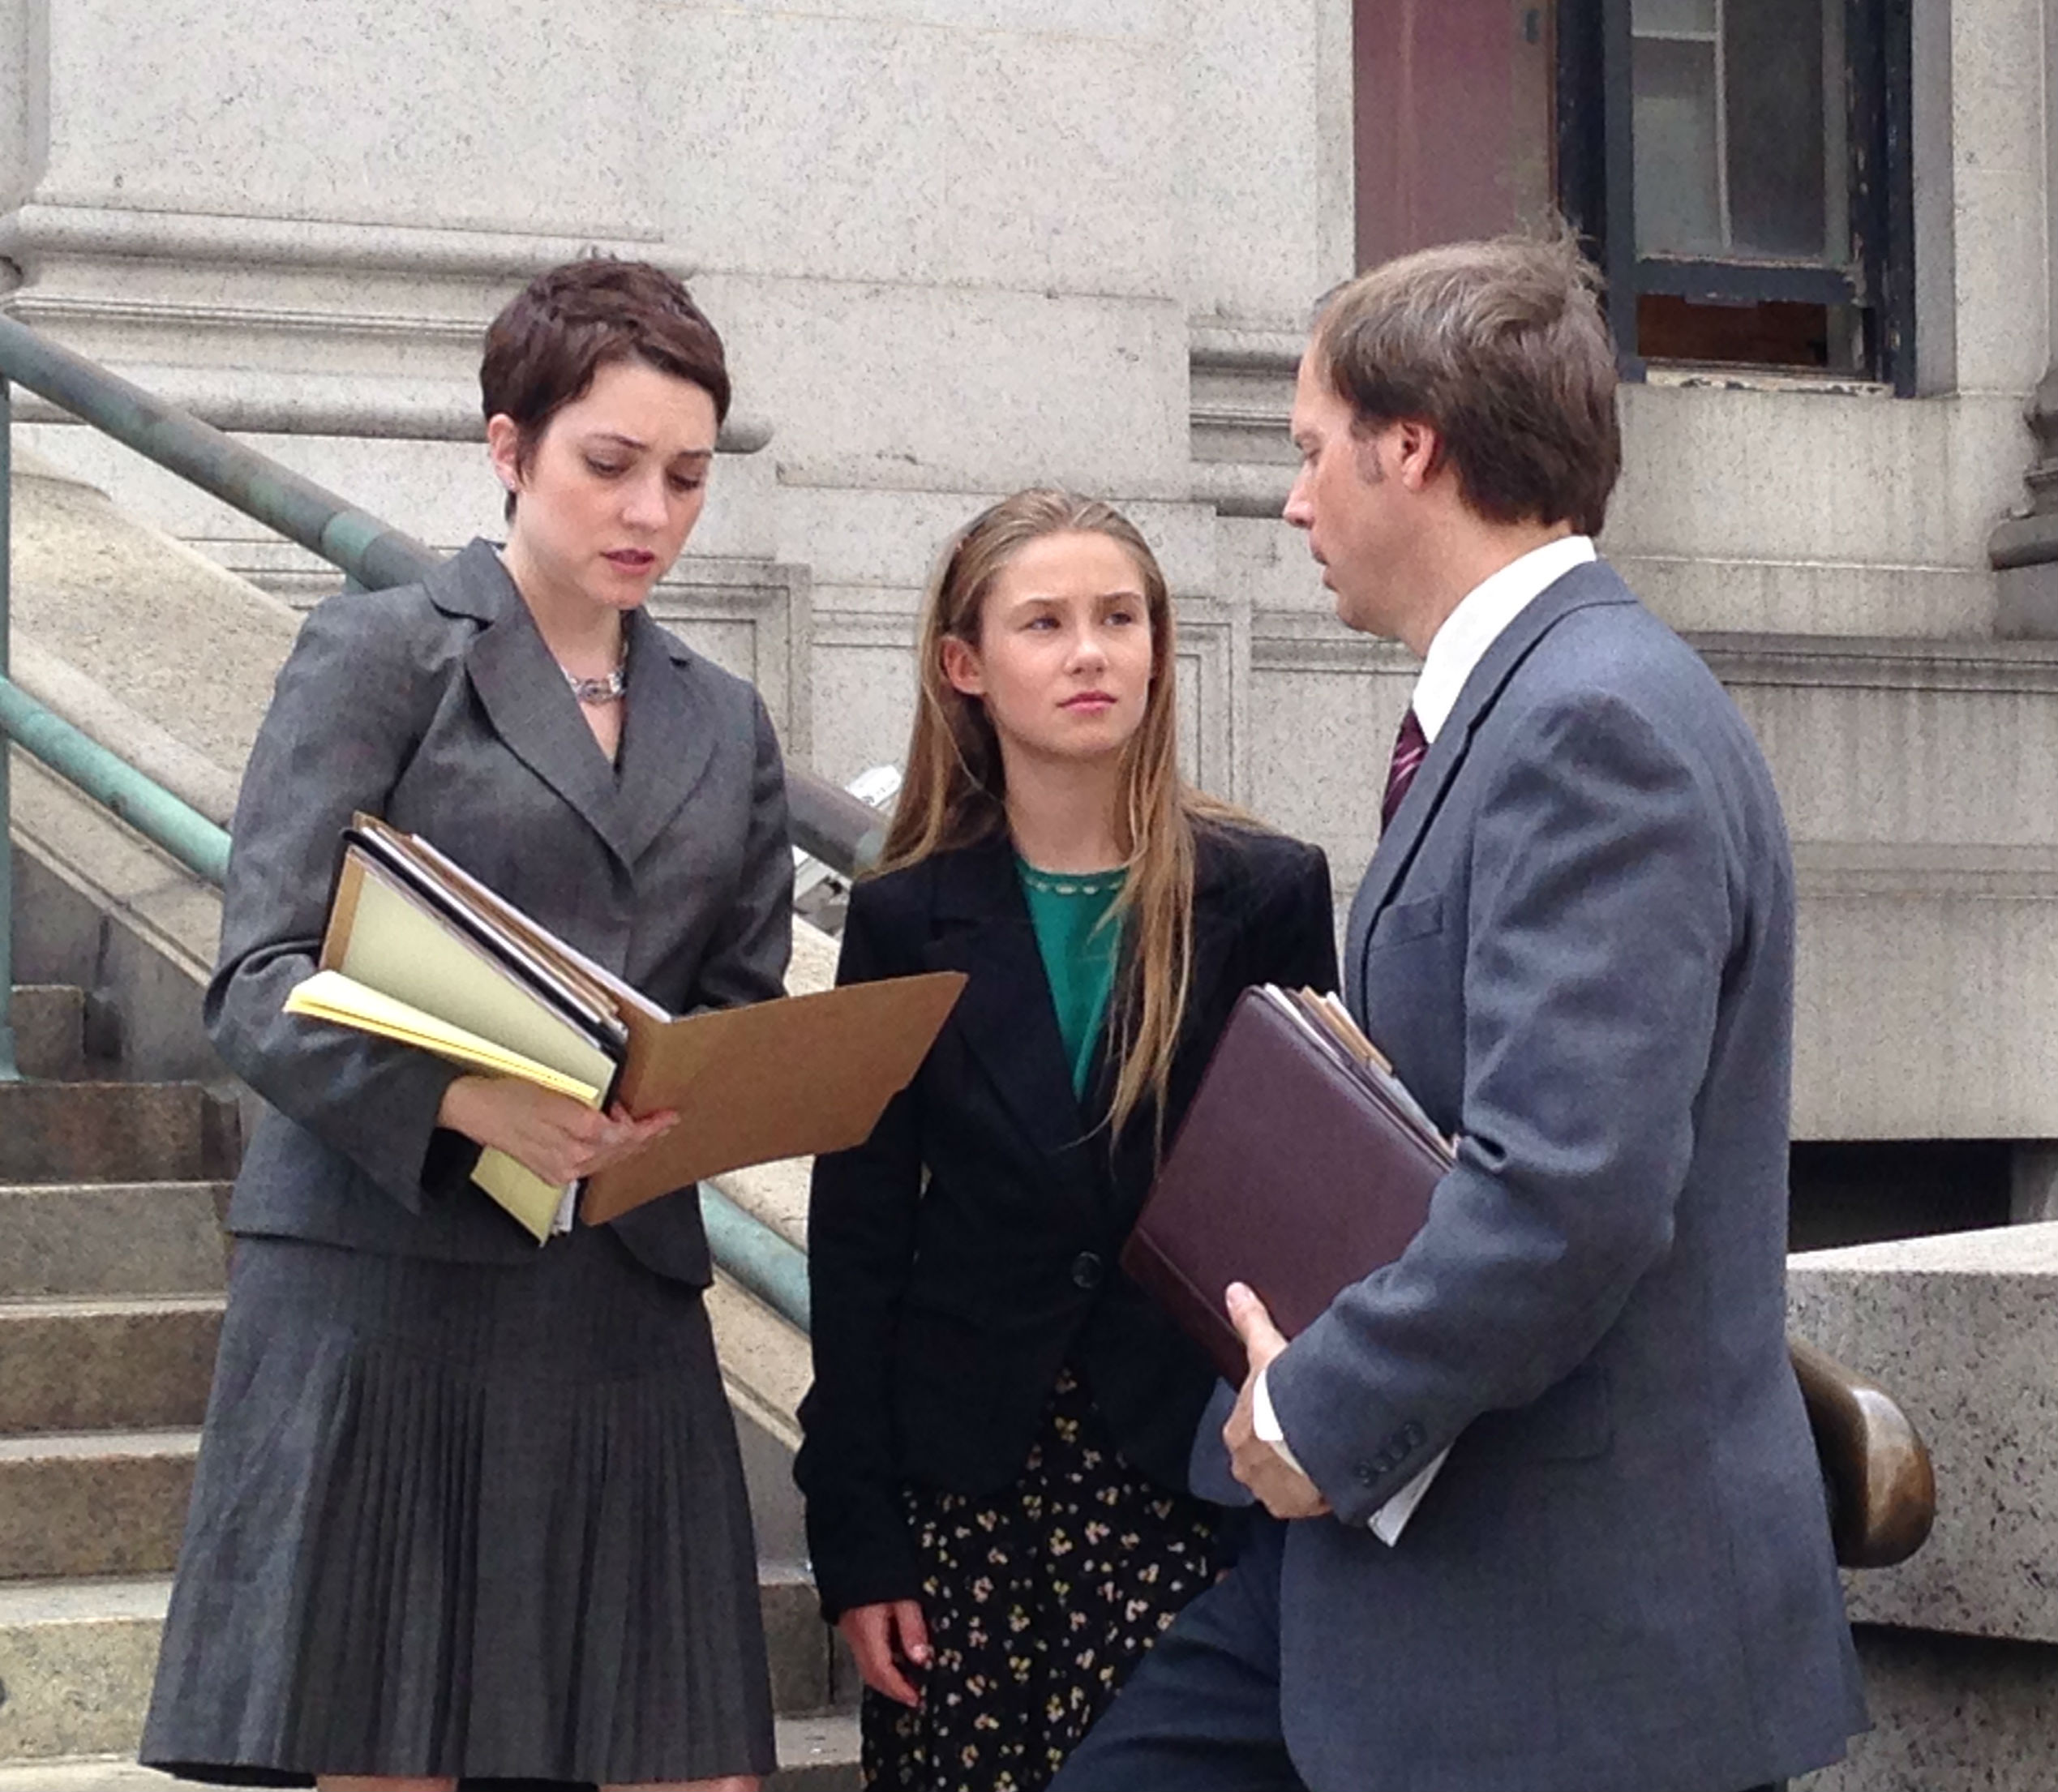 Kylie with Susan Gross & Grant Benton in a scene from 